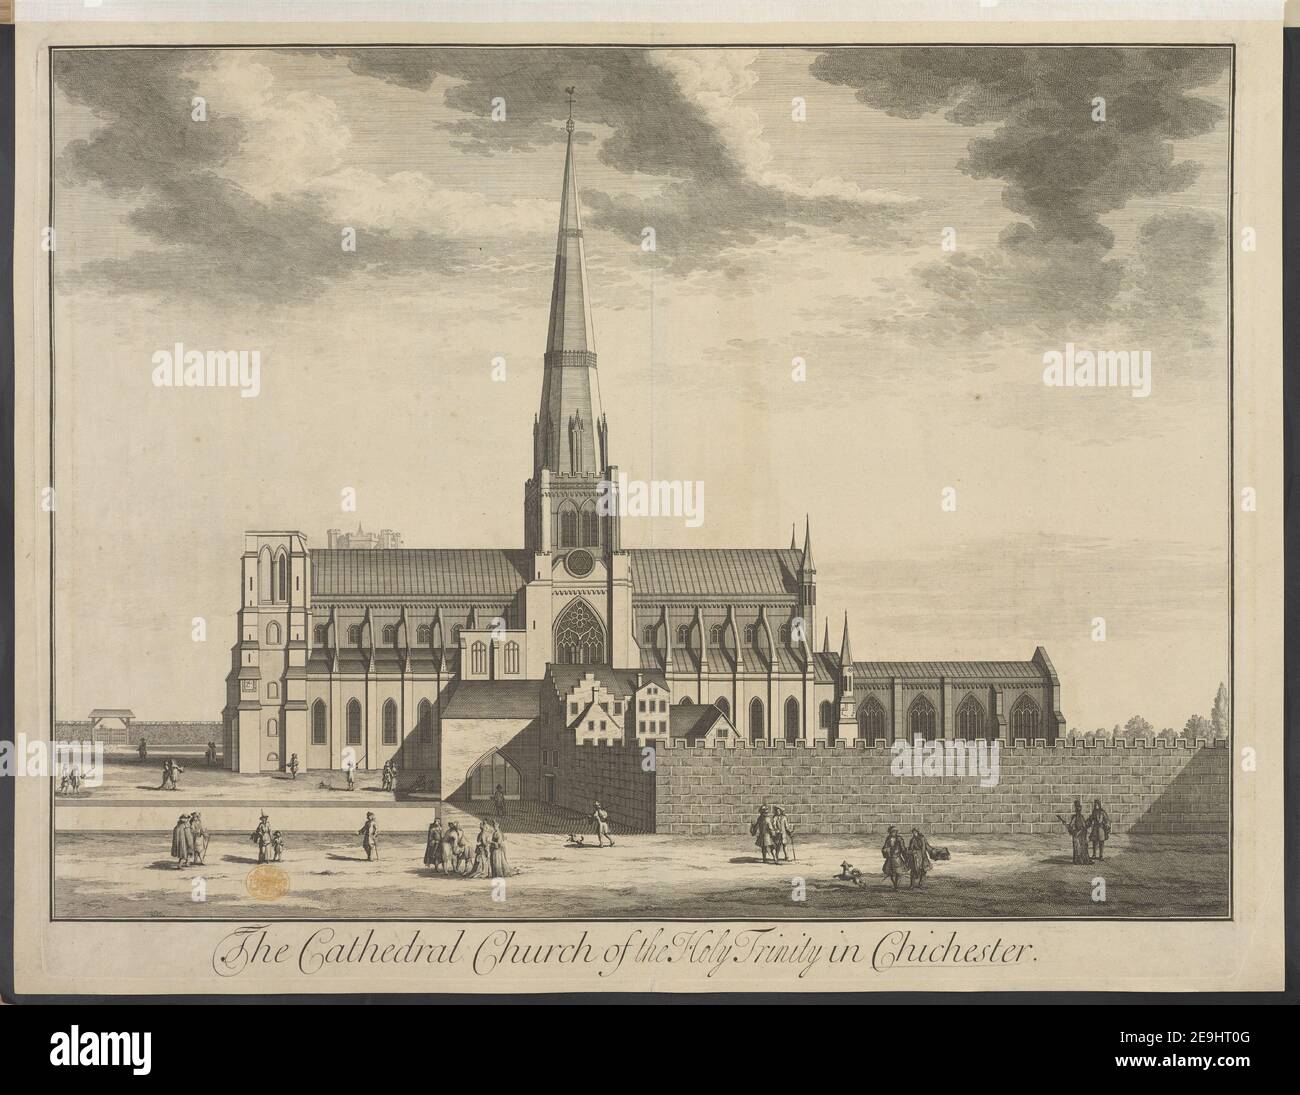 The Cathedral Church of the Holy Trinity in Chichester. Author  Kip, Johannes 42.19.e. Place of publication: [London] Publisher: [J. Smith] Date of publication: [1712 c.]  Item type: 1 print Medium: etching Dimensions: platemark 45.8 x 59.3 cm.  Former owner: George III, King of Great Britain, 1738-1820 Stock Photo